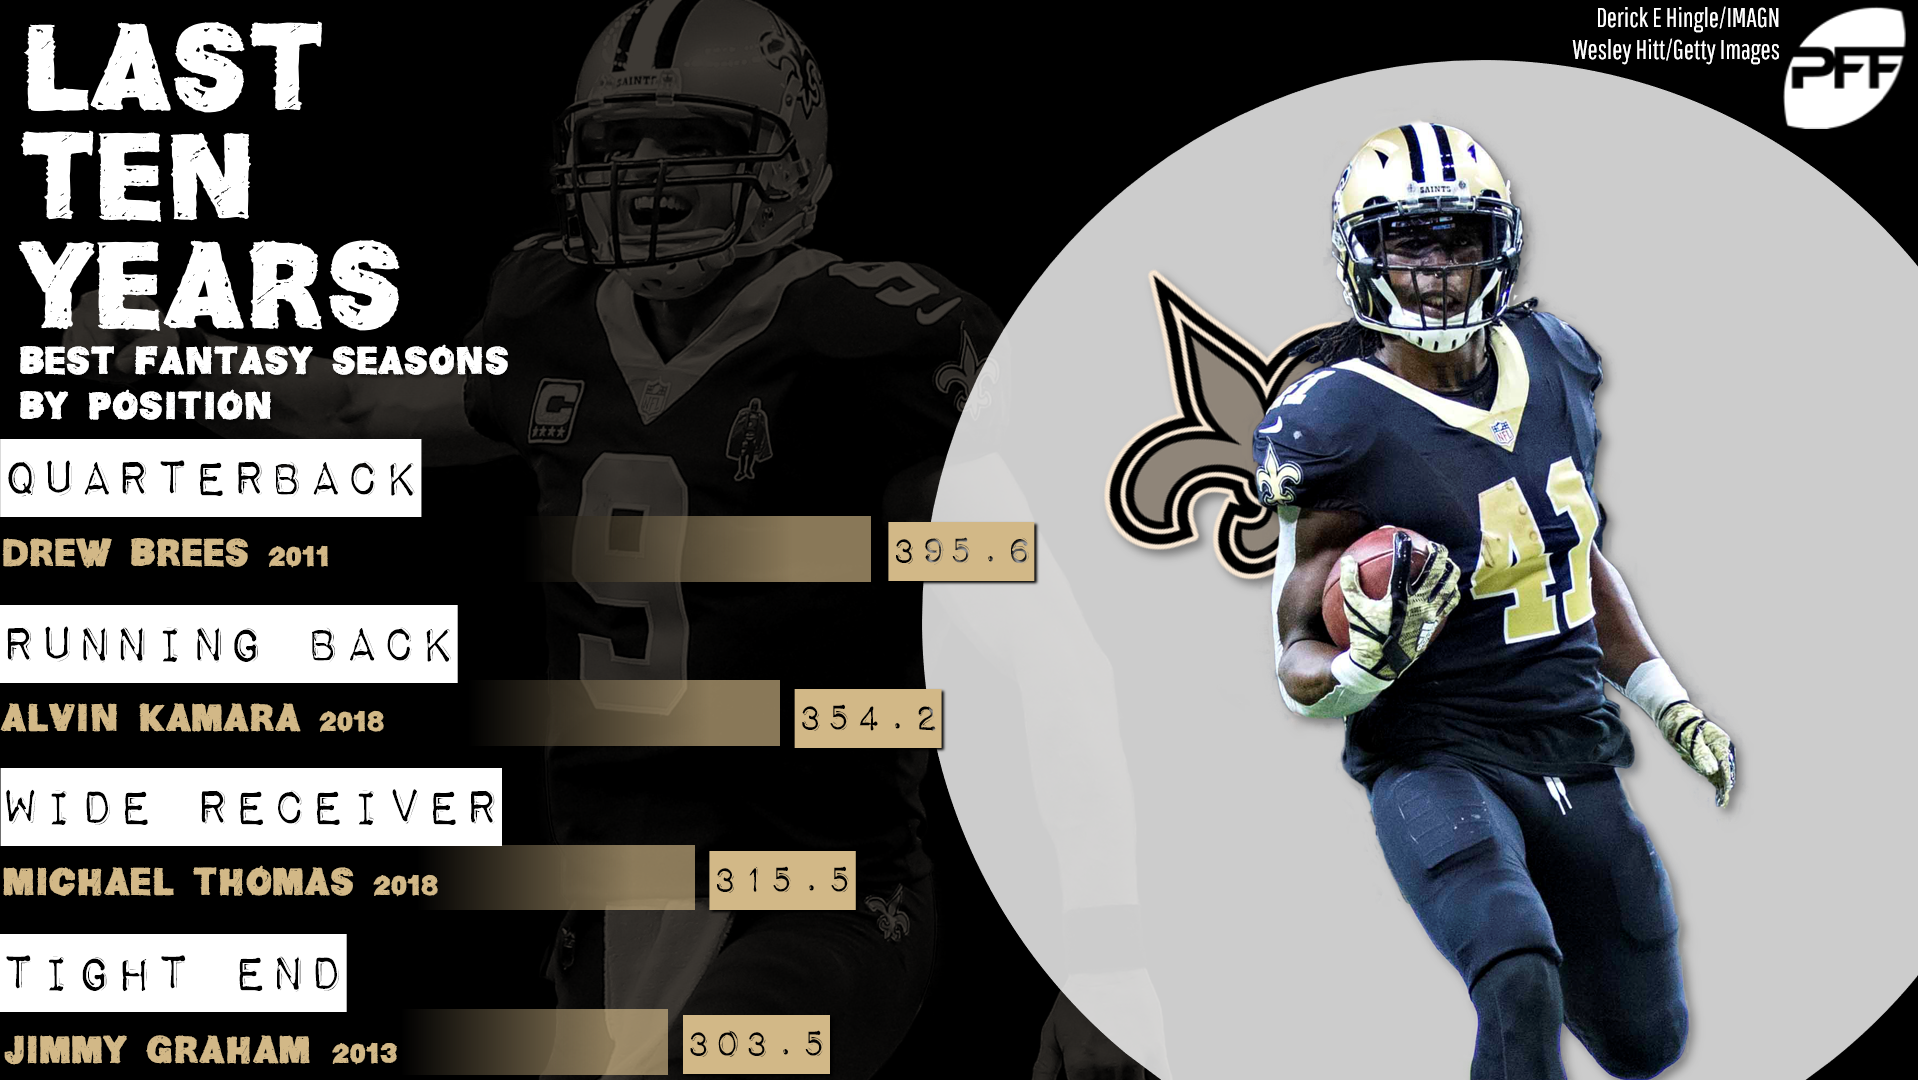 Fantasy football stats New Orleans Saints best of the last decade